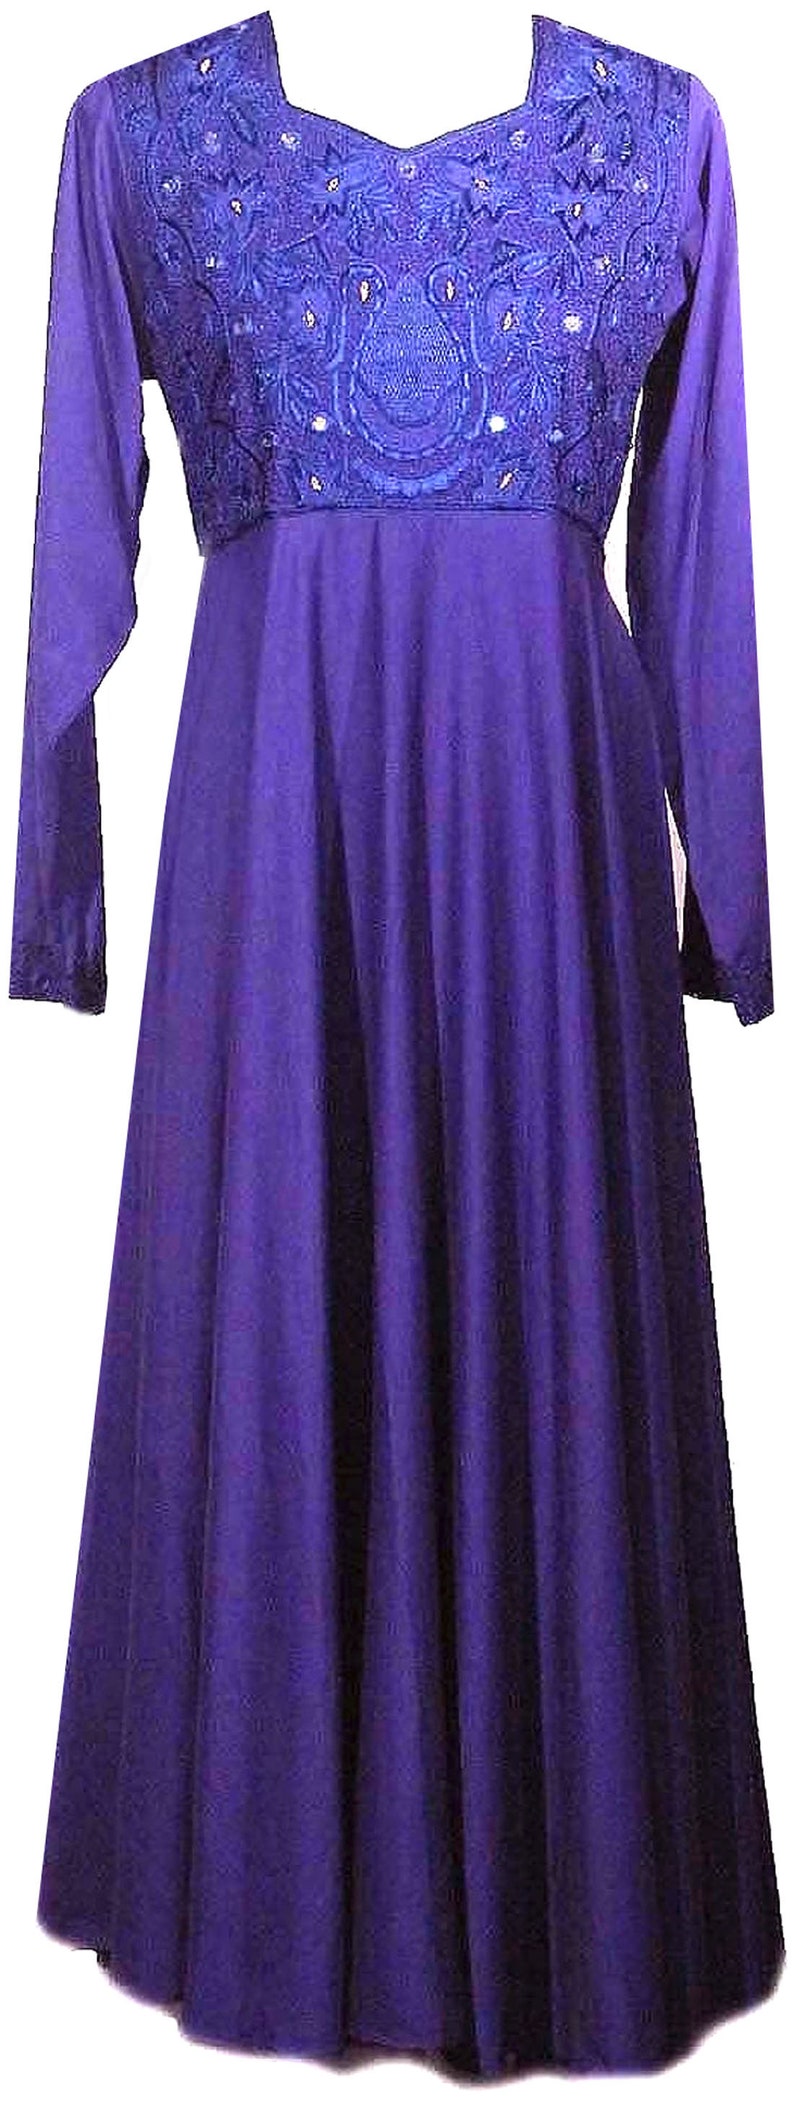 Vintage Embroidered Dress / Purple / Long Sleeves / Mirror Accents / Lace-Up Back / 1970s Fits Size Small to Medium image 4